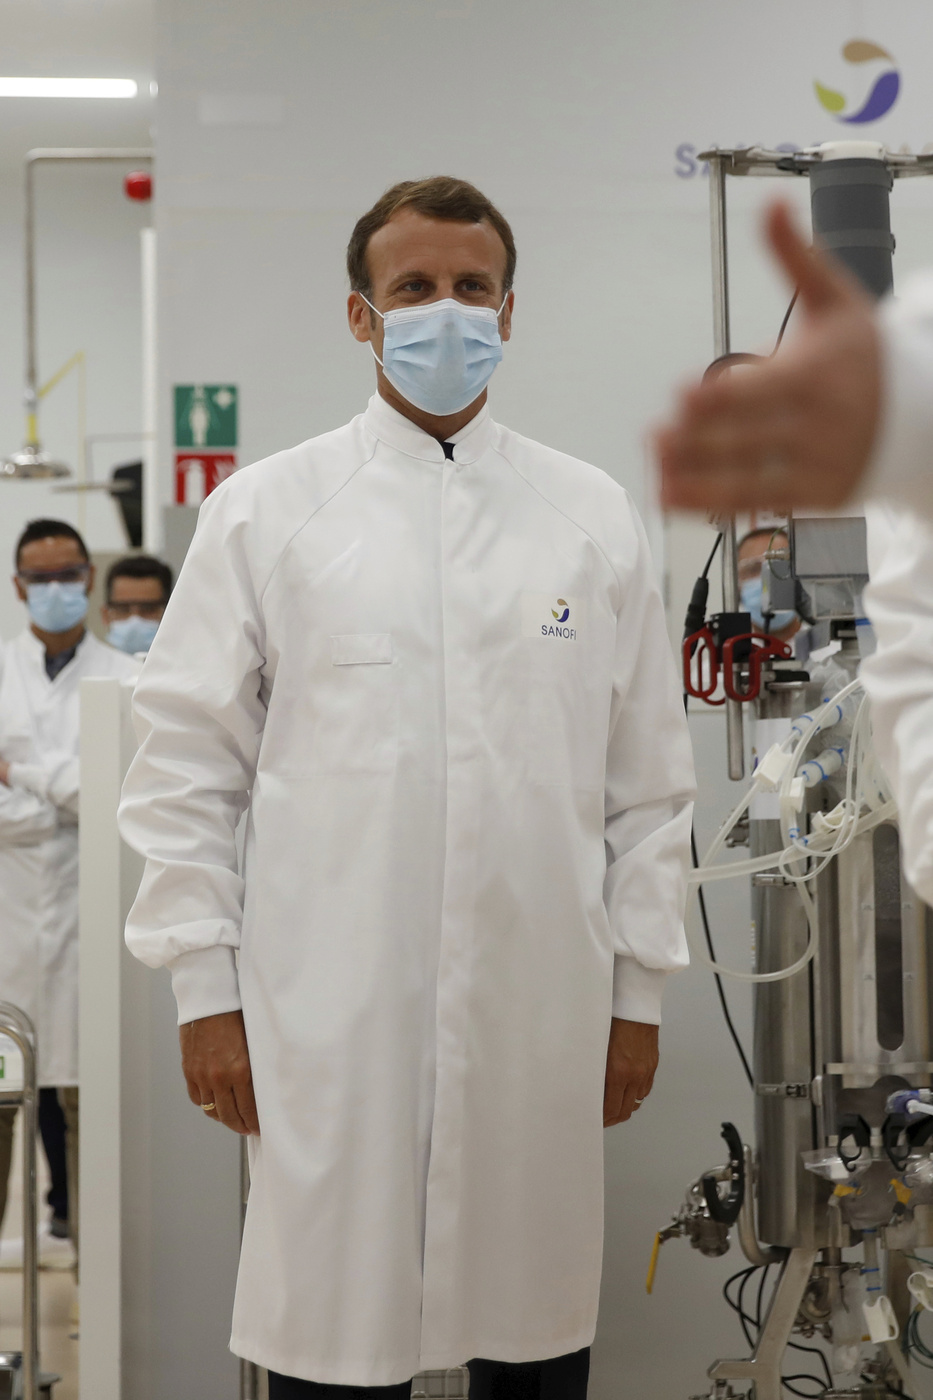 French President Emmanuel Macron visits an industrial development laboratory at the French drugmaker's vaccine unit Sanofi Pasteur plant in Marcy-l'Etoile, near Lyon, central France, Tuesday, June 16, 2020. The visit comes after rival pharmaceutical company AstraZeneca this weekend announced a deal to supply 400 million vaccine doses to EU countries, including France. (Gonzalo Fuentes/Pool via AP)